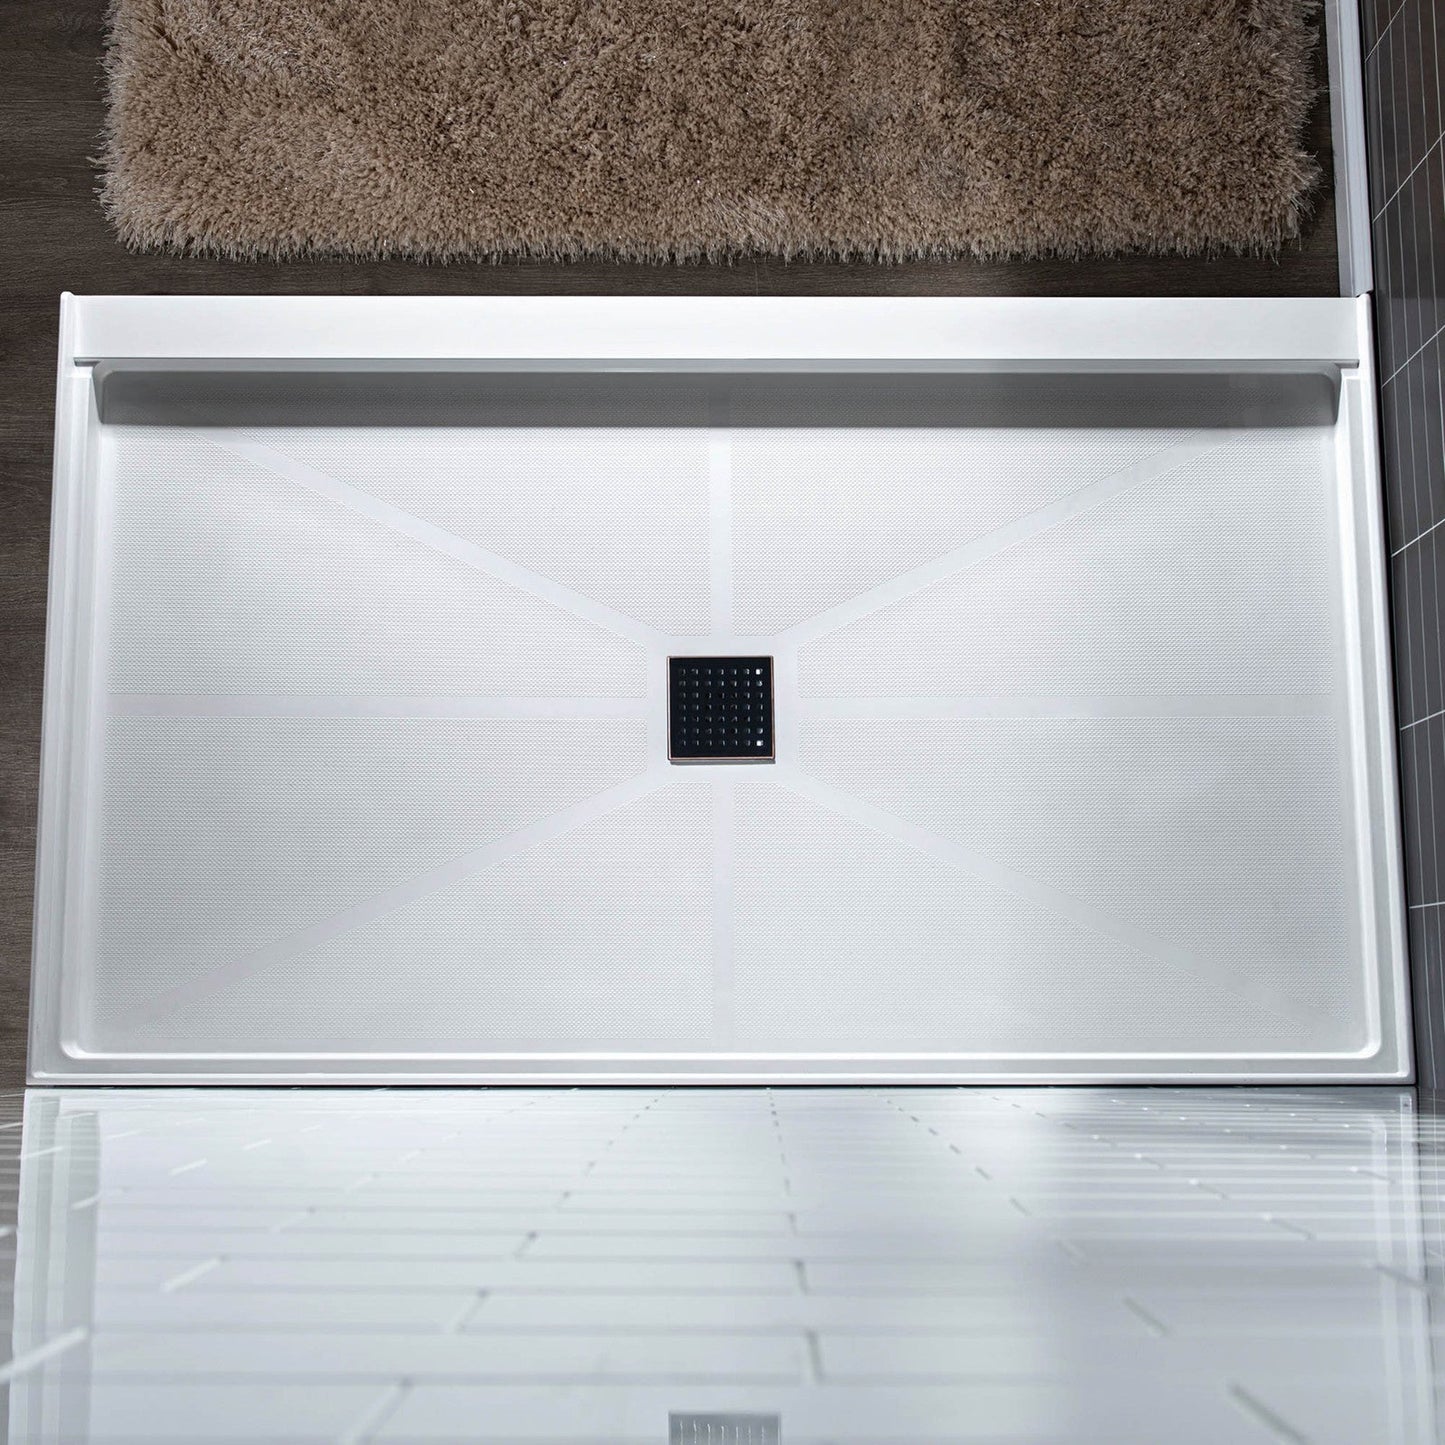 WoodBridge 60" x 32" White Solid Surface Shower Base Center Drain Location With Oil Rubbed Bronze Trench Drain Cover